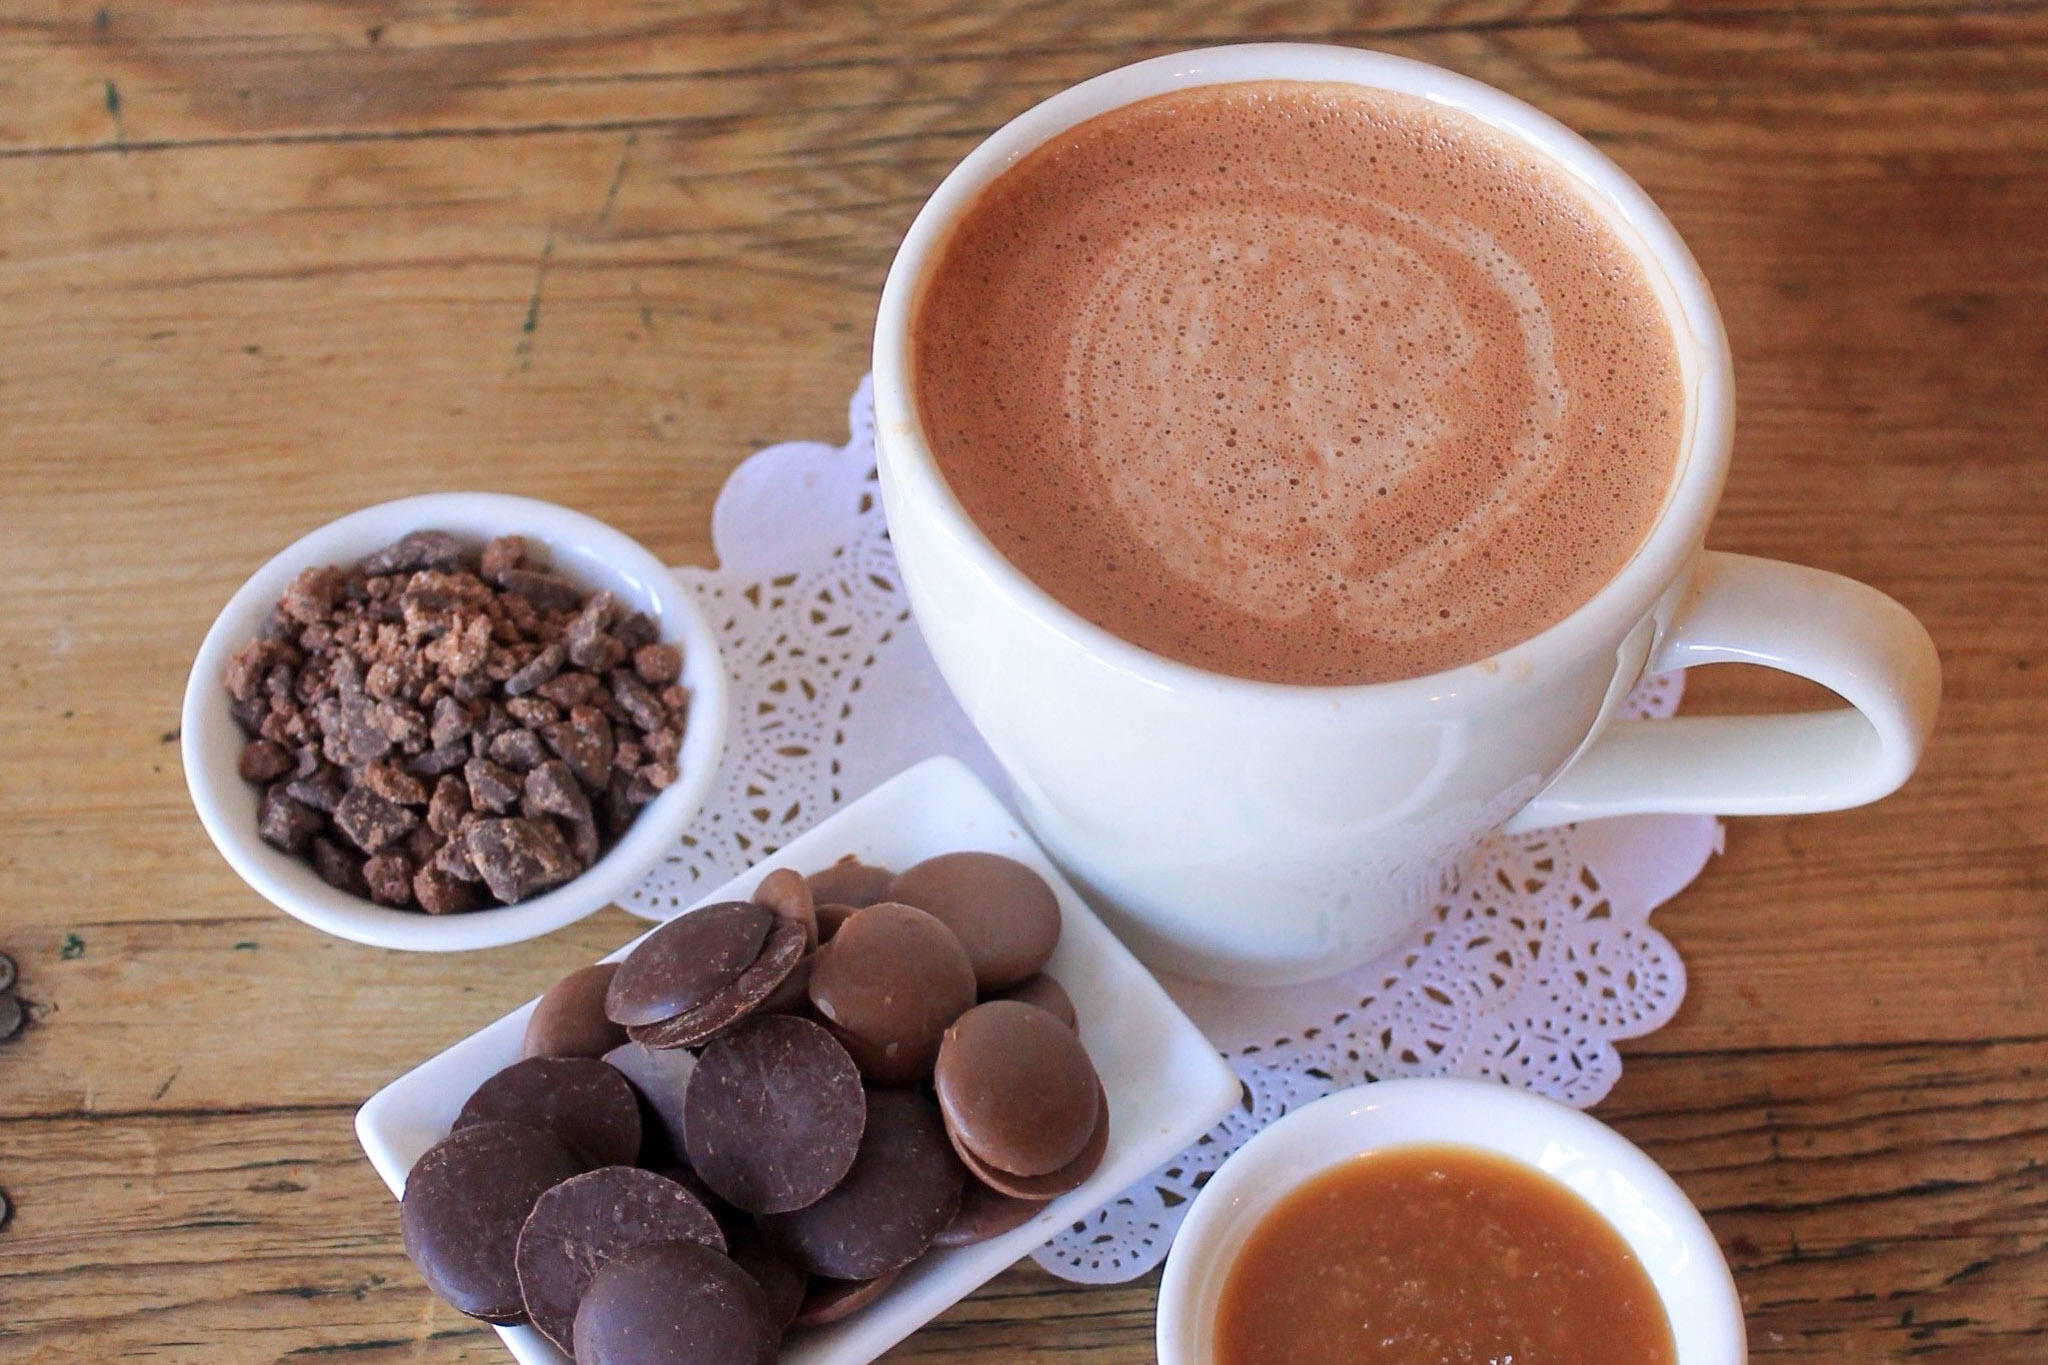 It’s Cold and Getting Colder, So Here’s The Standard’s Hot Chocolate Roundup